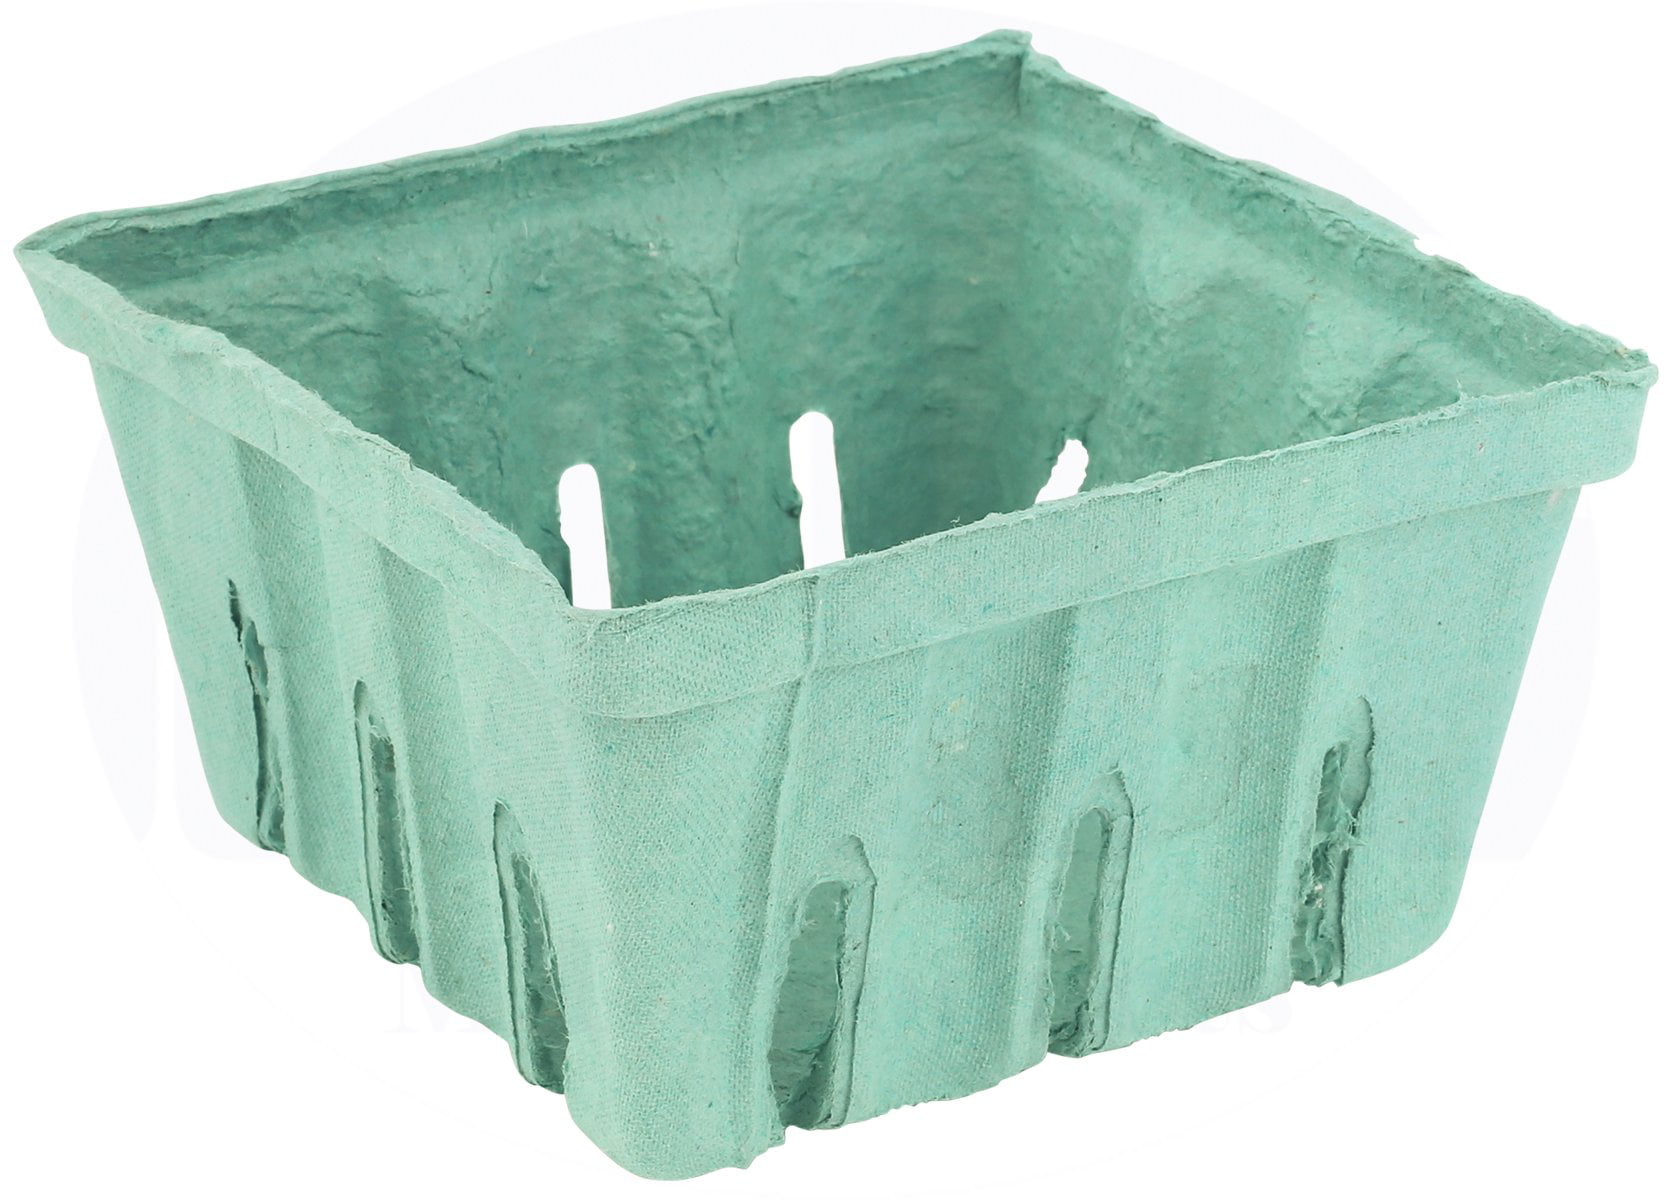 Details about    Pint Green Molded Pulp Fiber Berry Basket Produce Vented Container ... 44 Pack 